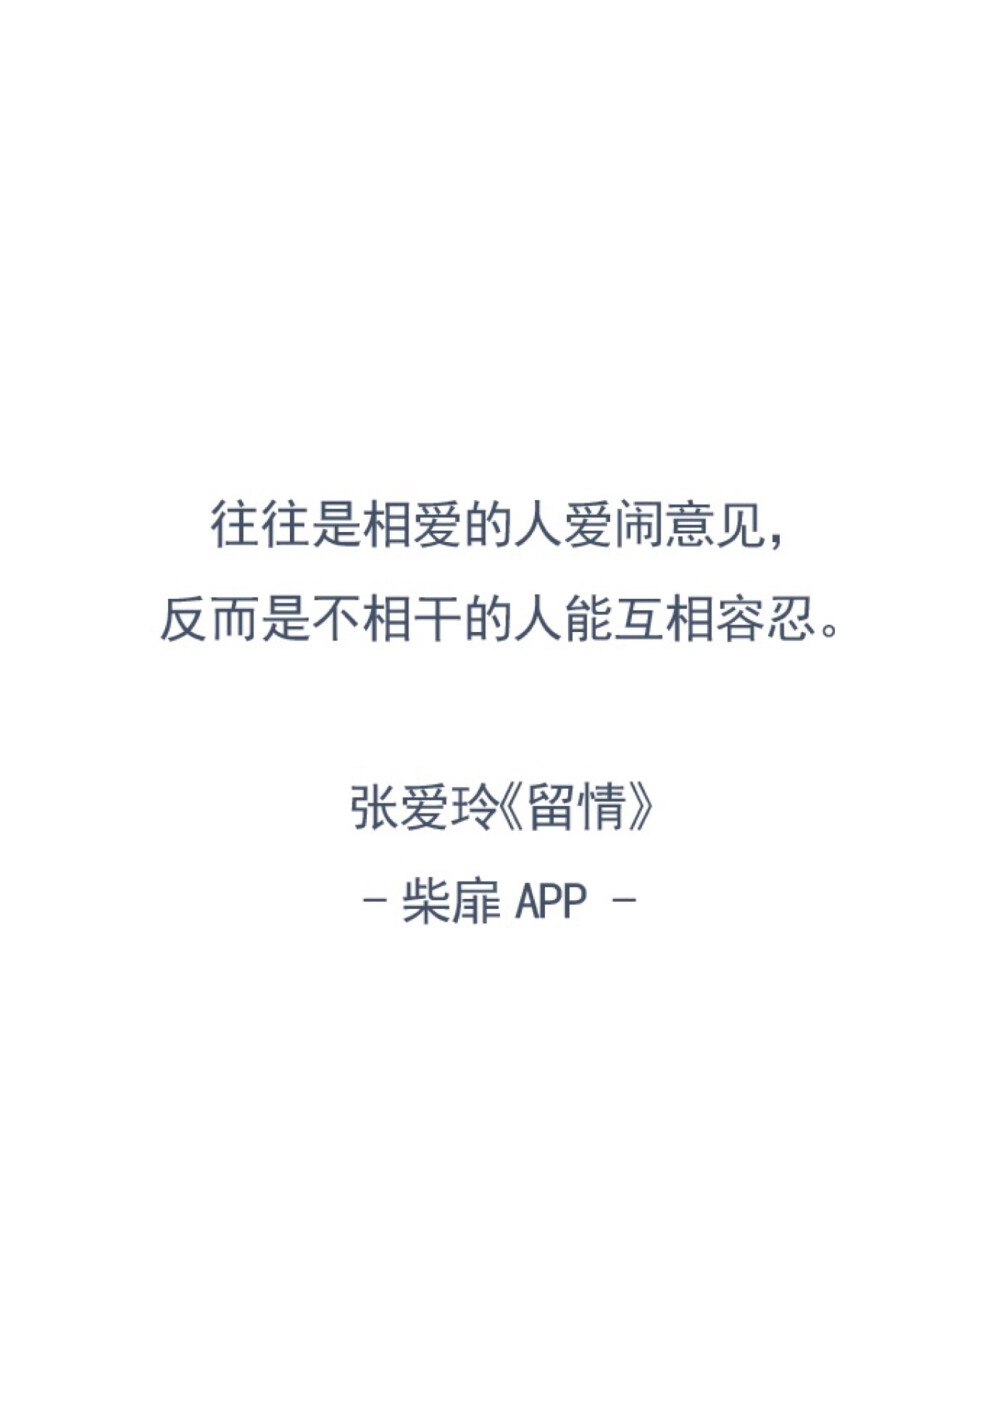 from 火柴盒